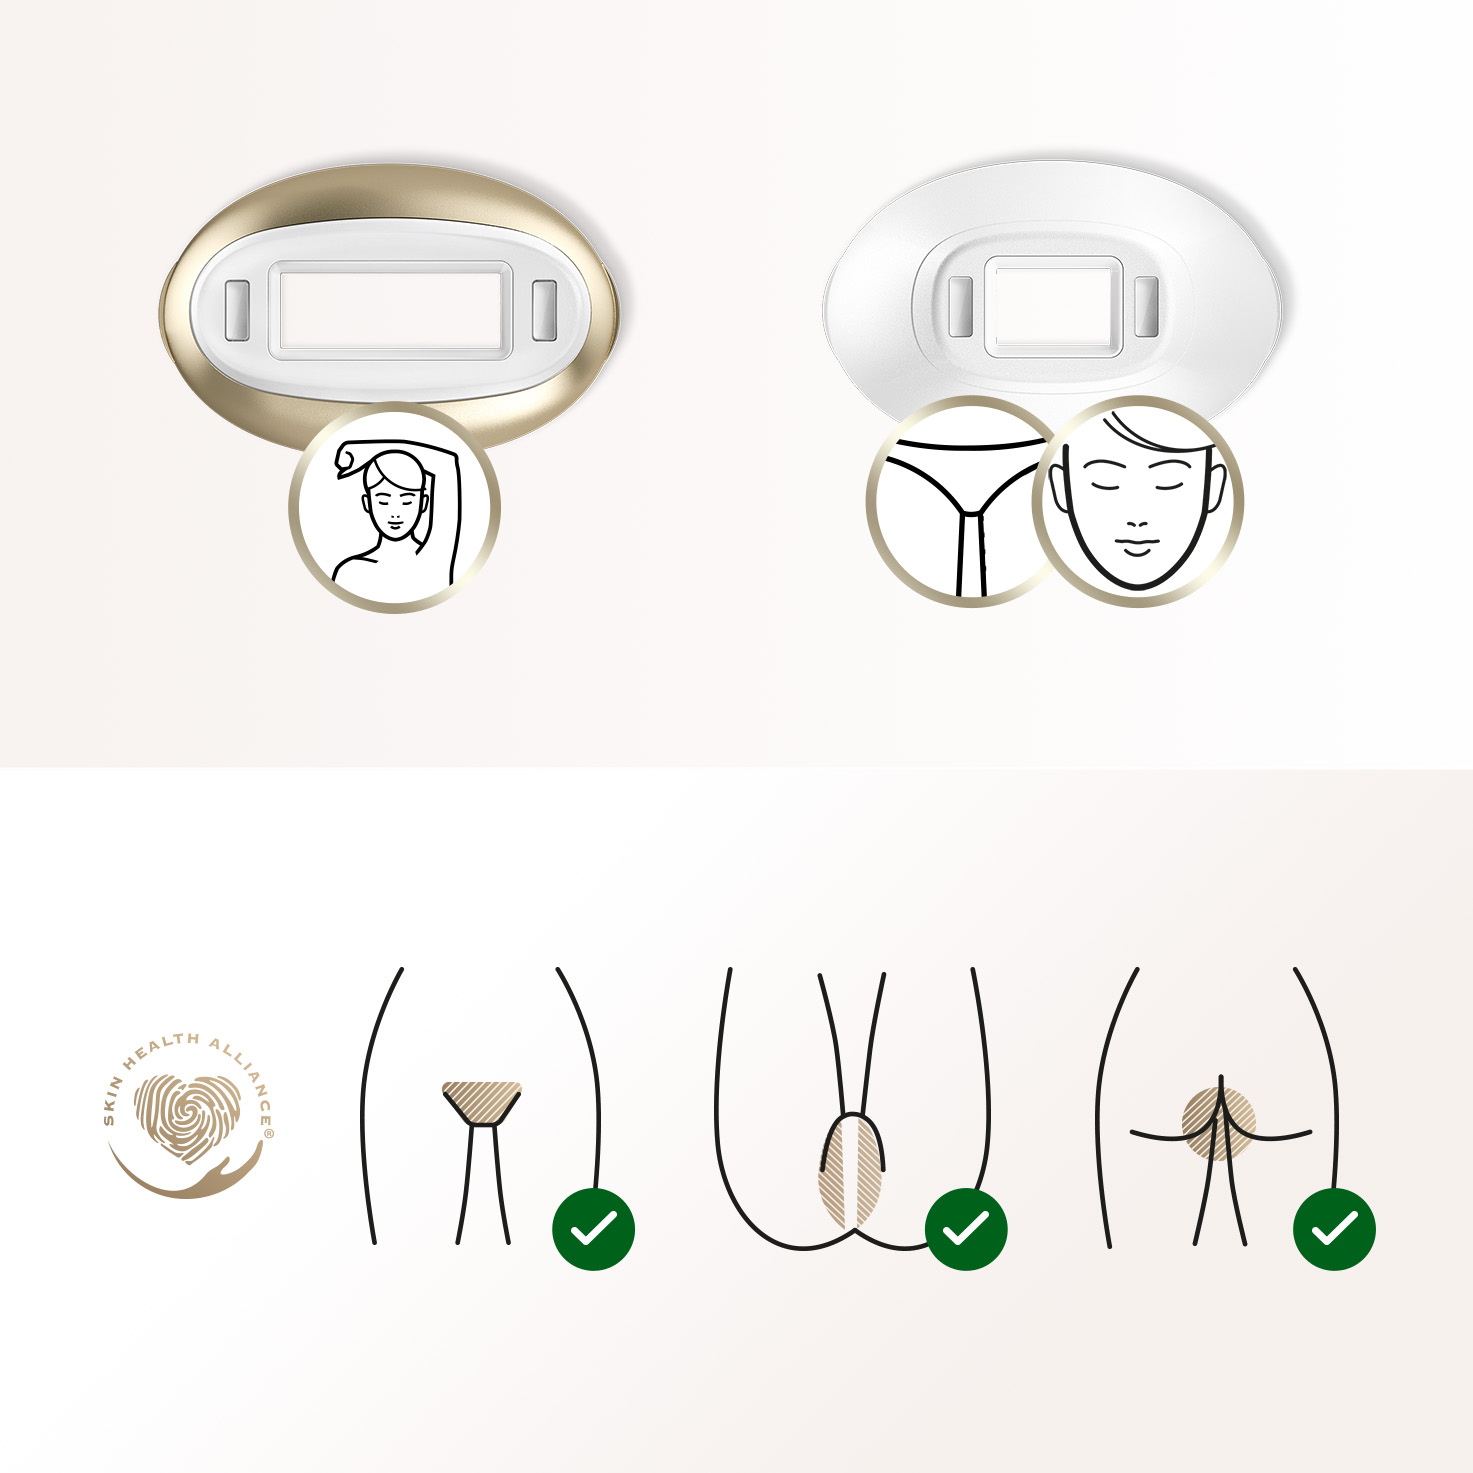 Hair Removal] Hello! Can I use IPL twice a week? How to turn off braun silk expert  pro lol? I don't see a turn off botton. Also, do I need to wear